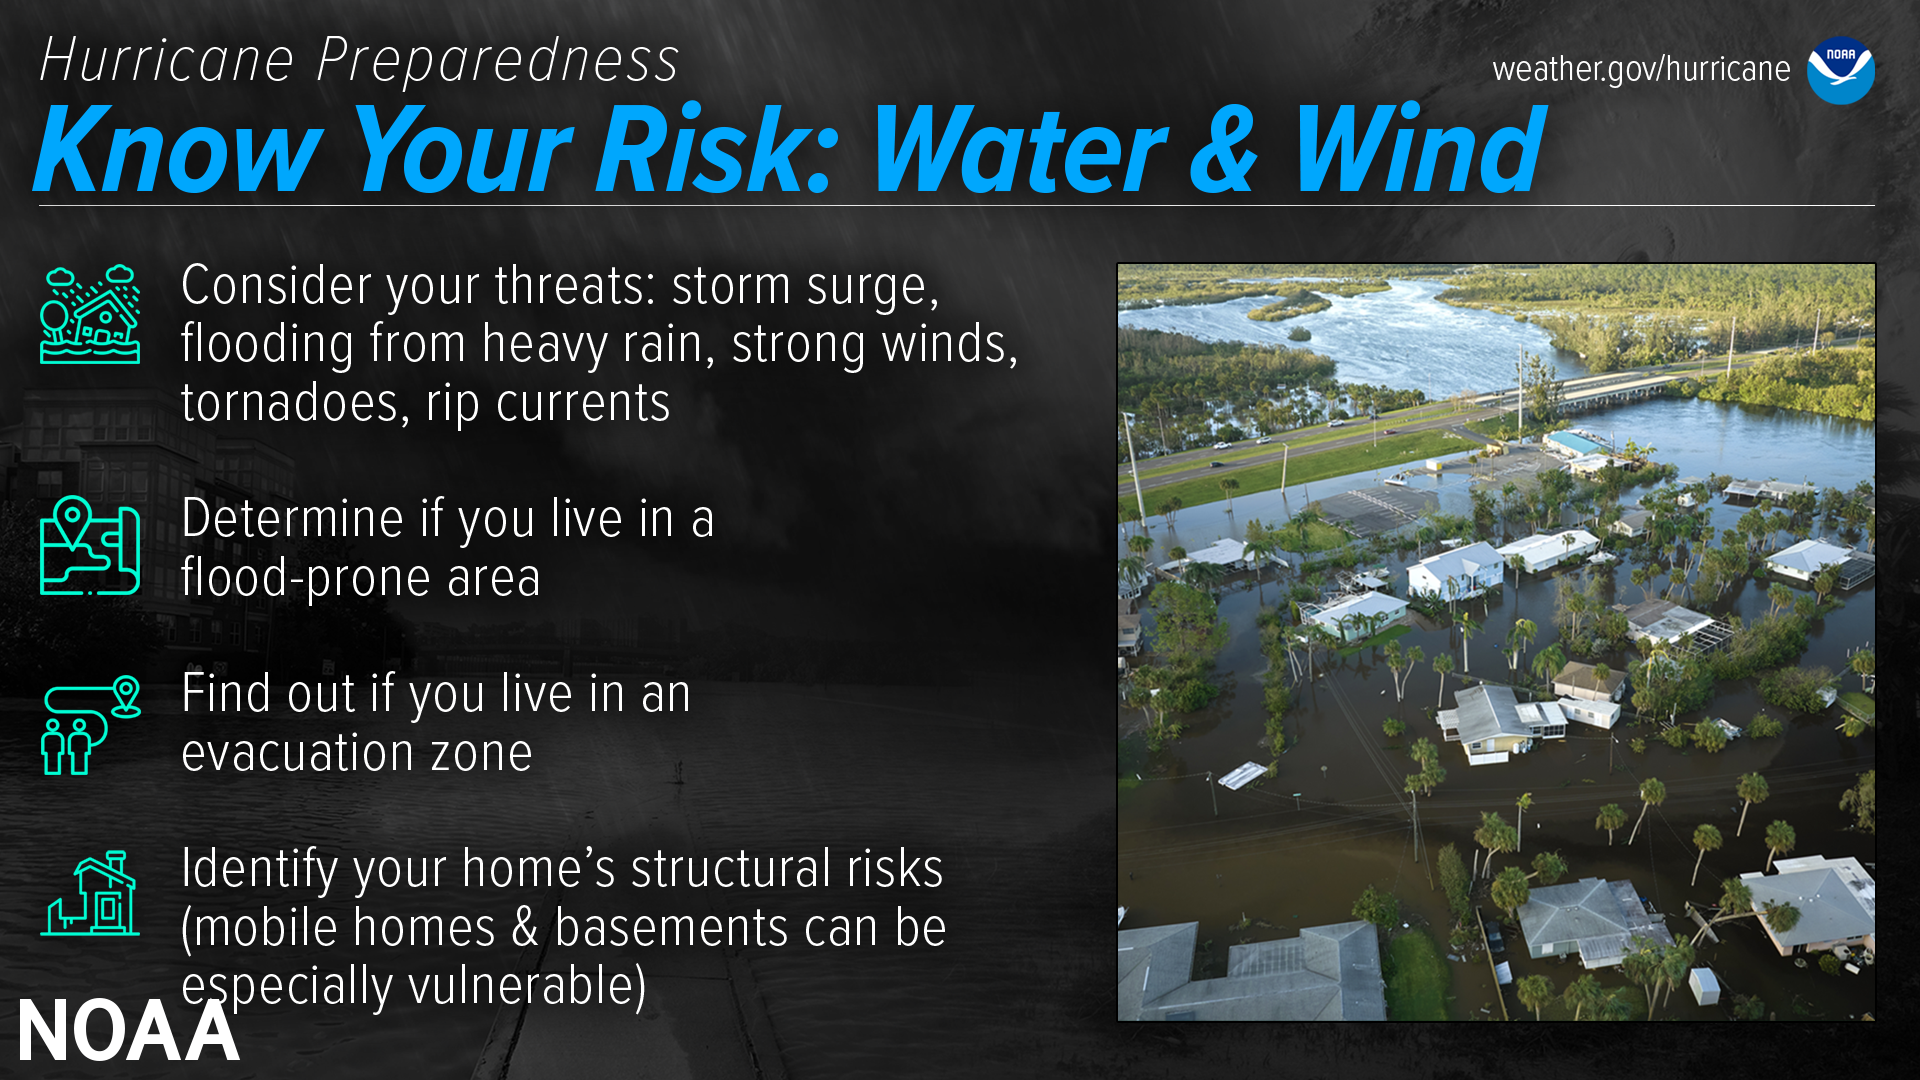 Hurricane Preparedness - Know Your Risk: Water & Wind. Consider your threats: storm surge, flooding from heavy rain, strong winds, tornadoes, rip currents. Determine if you live in a flood-prone area. Find out if you live in an evacuation zone. Identify your home's structural risk (mobile homes & basements can be especially vulnerable)